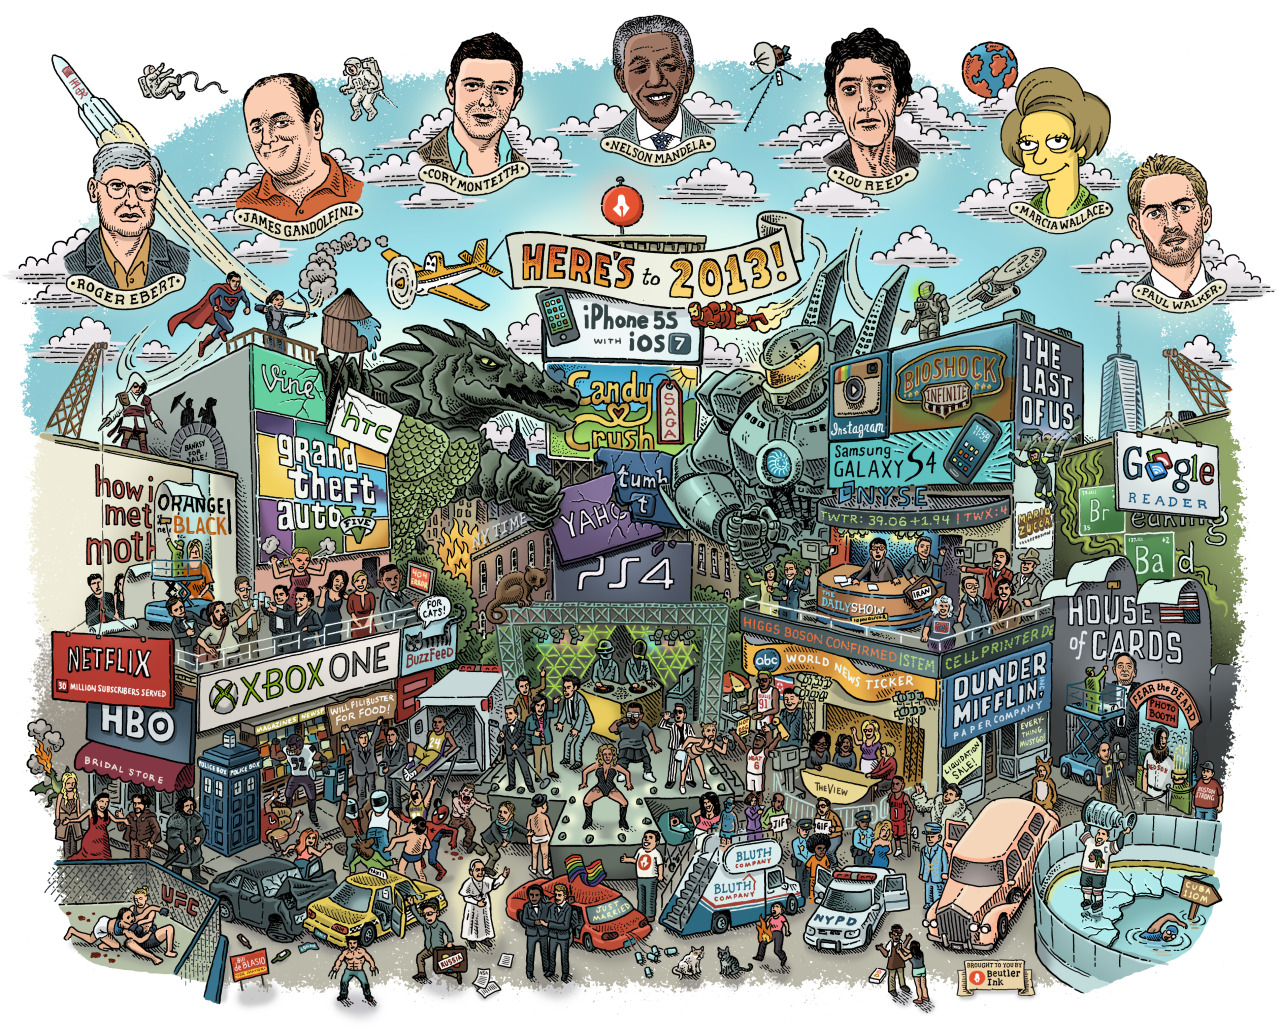 2013 pop culture and news mashup
These are the events of 2013 summed up in a single drawing. There are around 90 separate events depicted, including Game of Thrones’ Red Wedding, a bunch of video games & apps, pop culture sadness, and news...